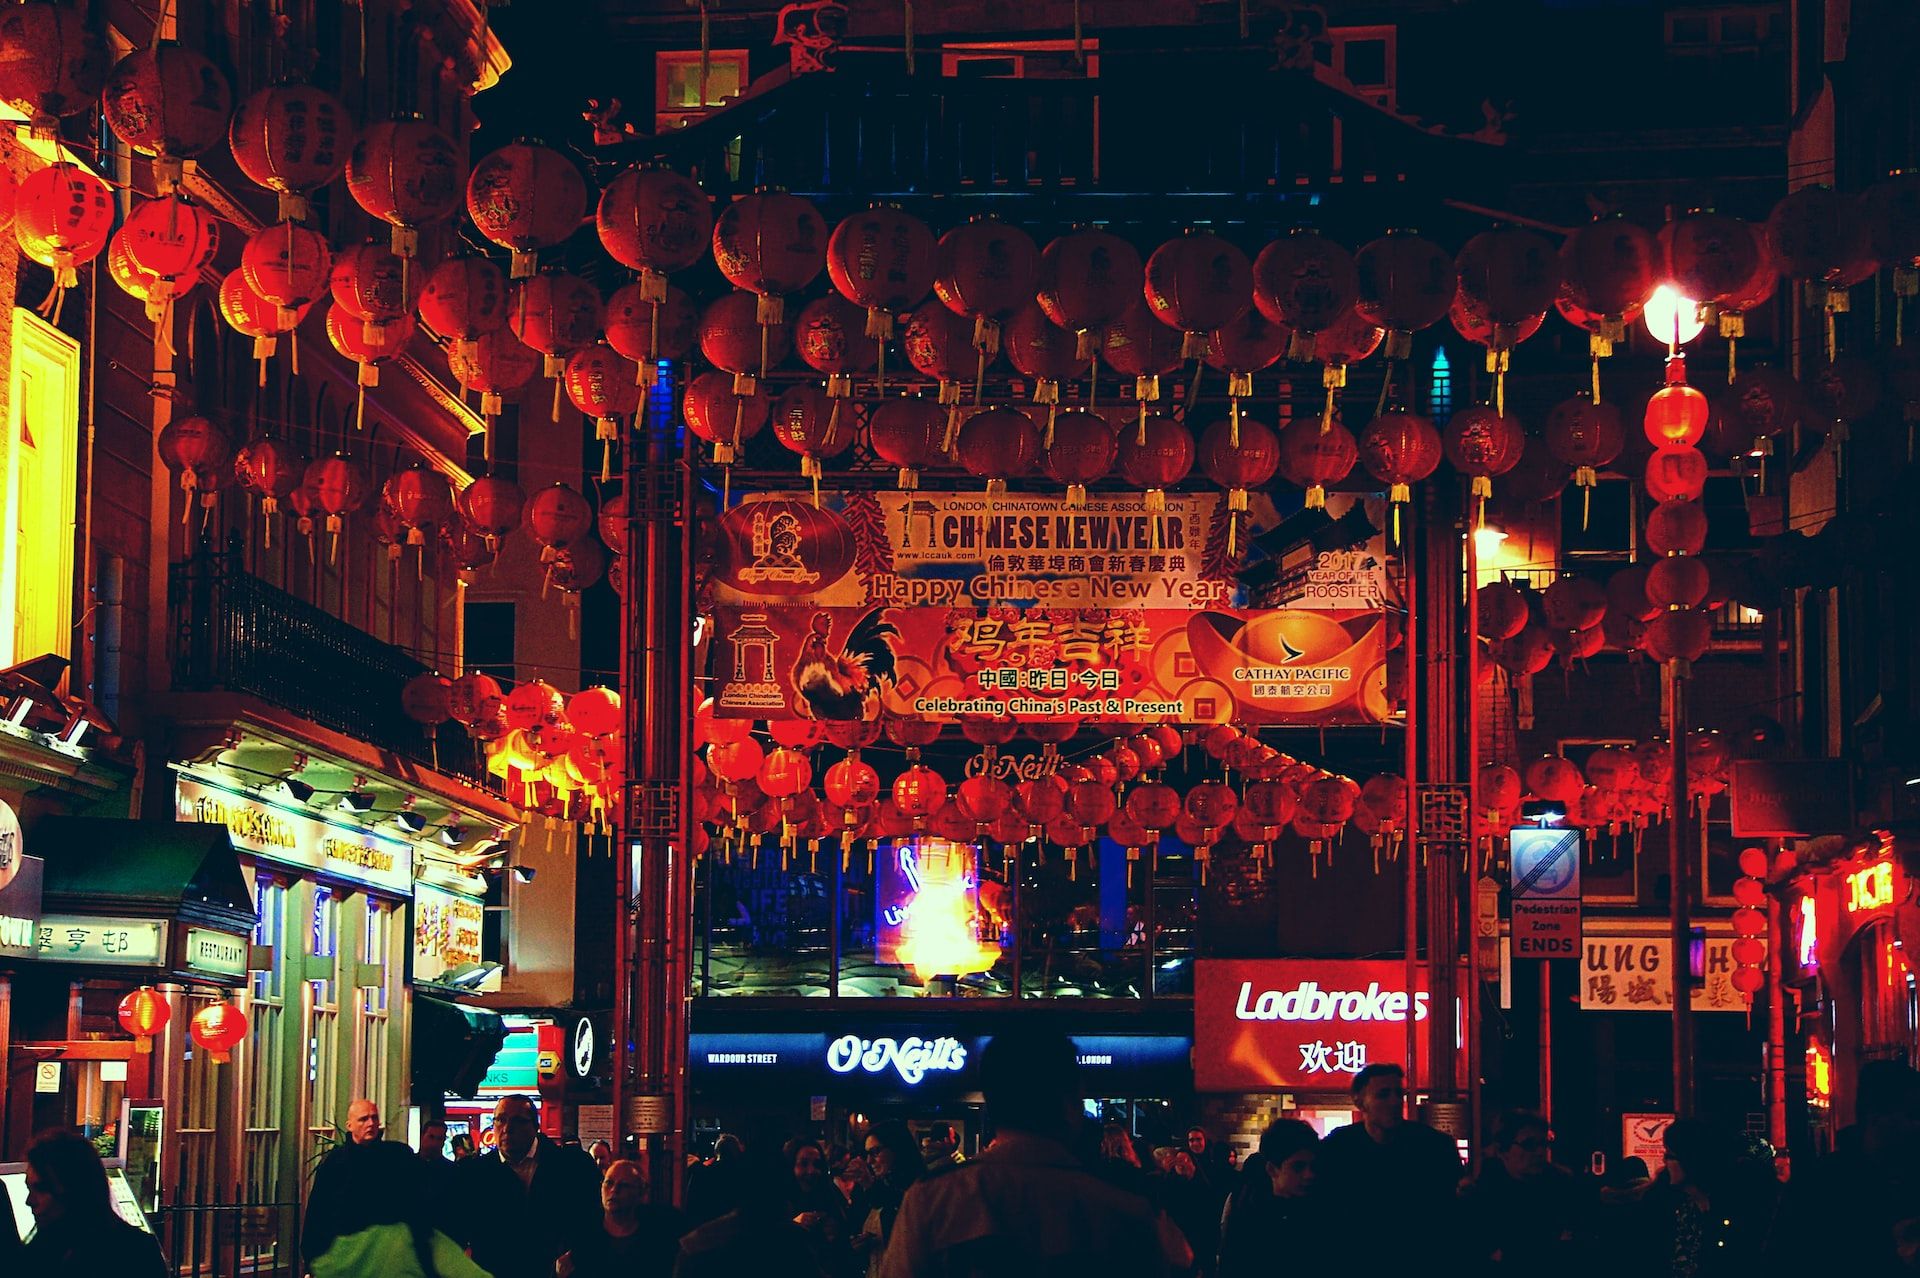 A busy Chinese New Year festival with red paper lanterns everywhere